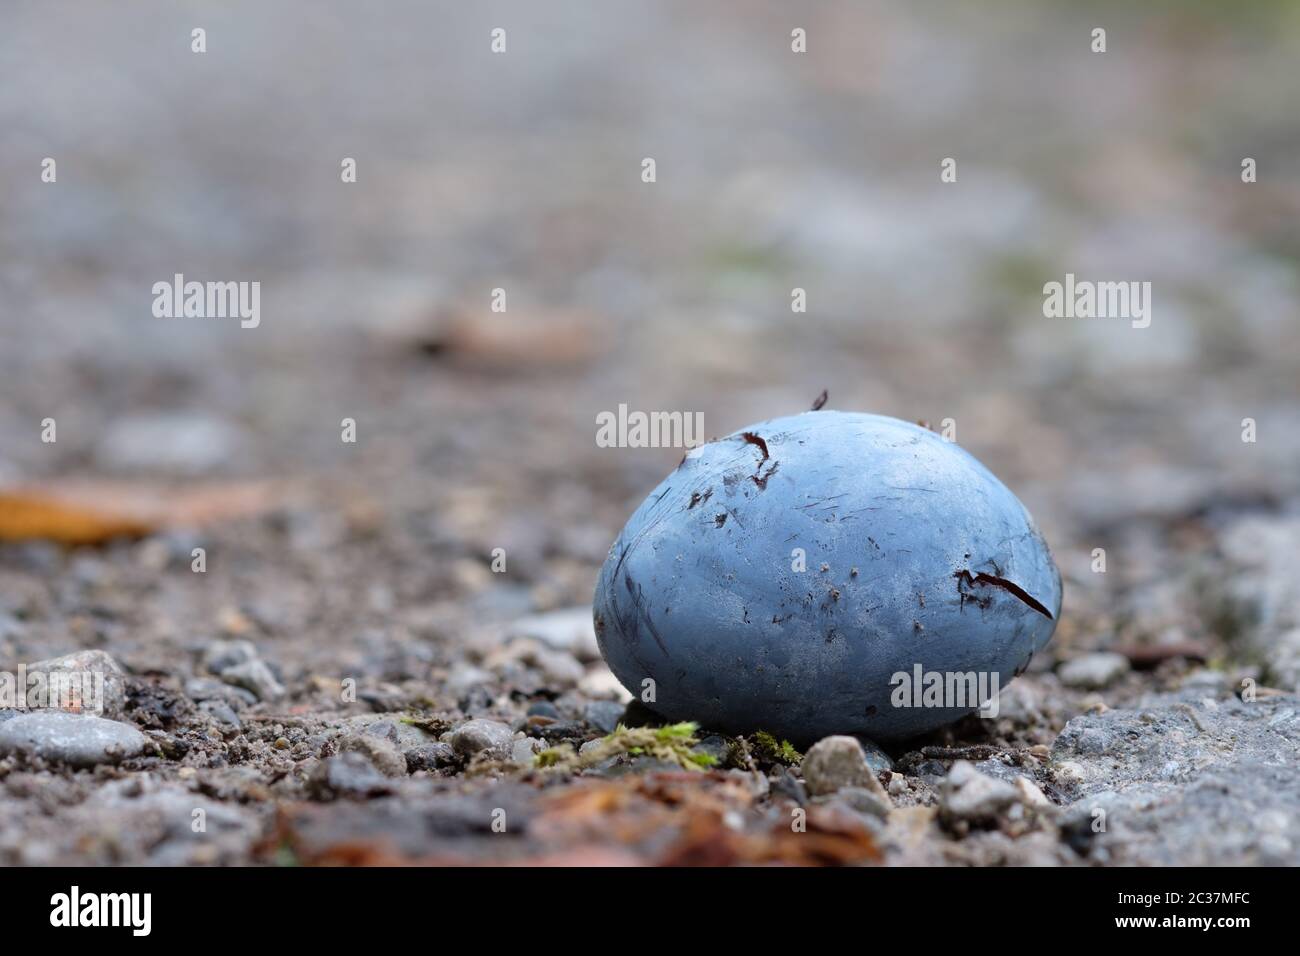 Plum windfall on the ground with blurred bokeh Stock Photo